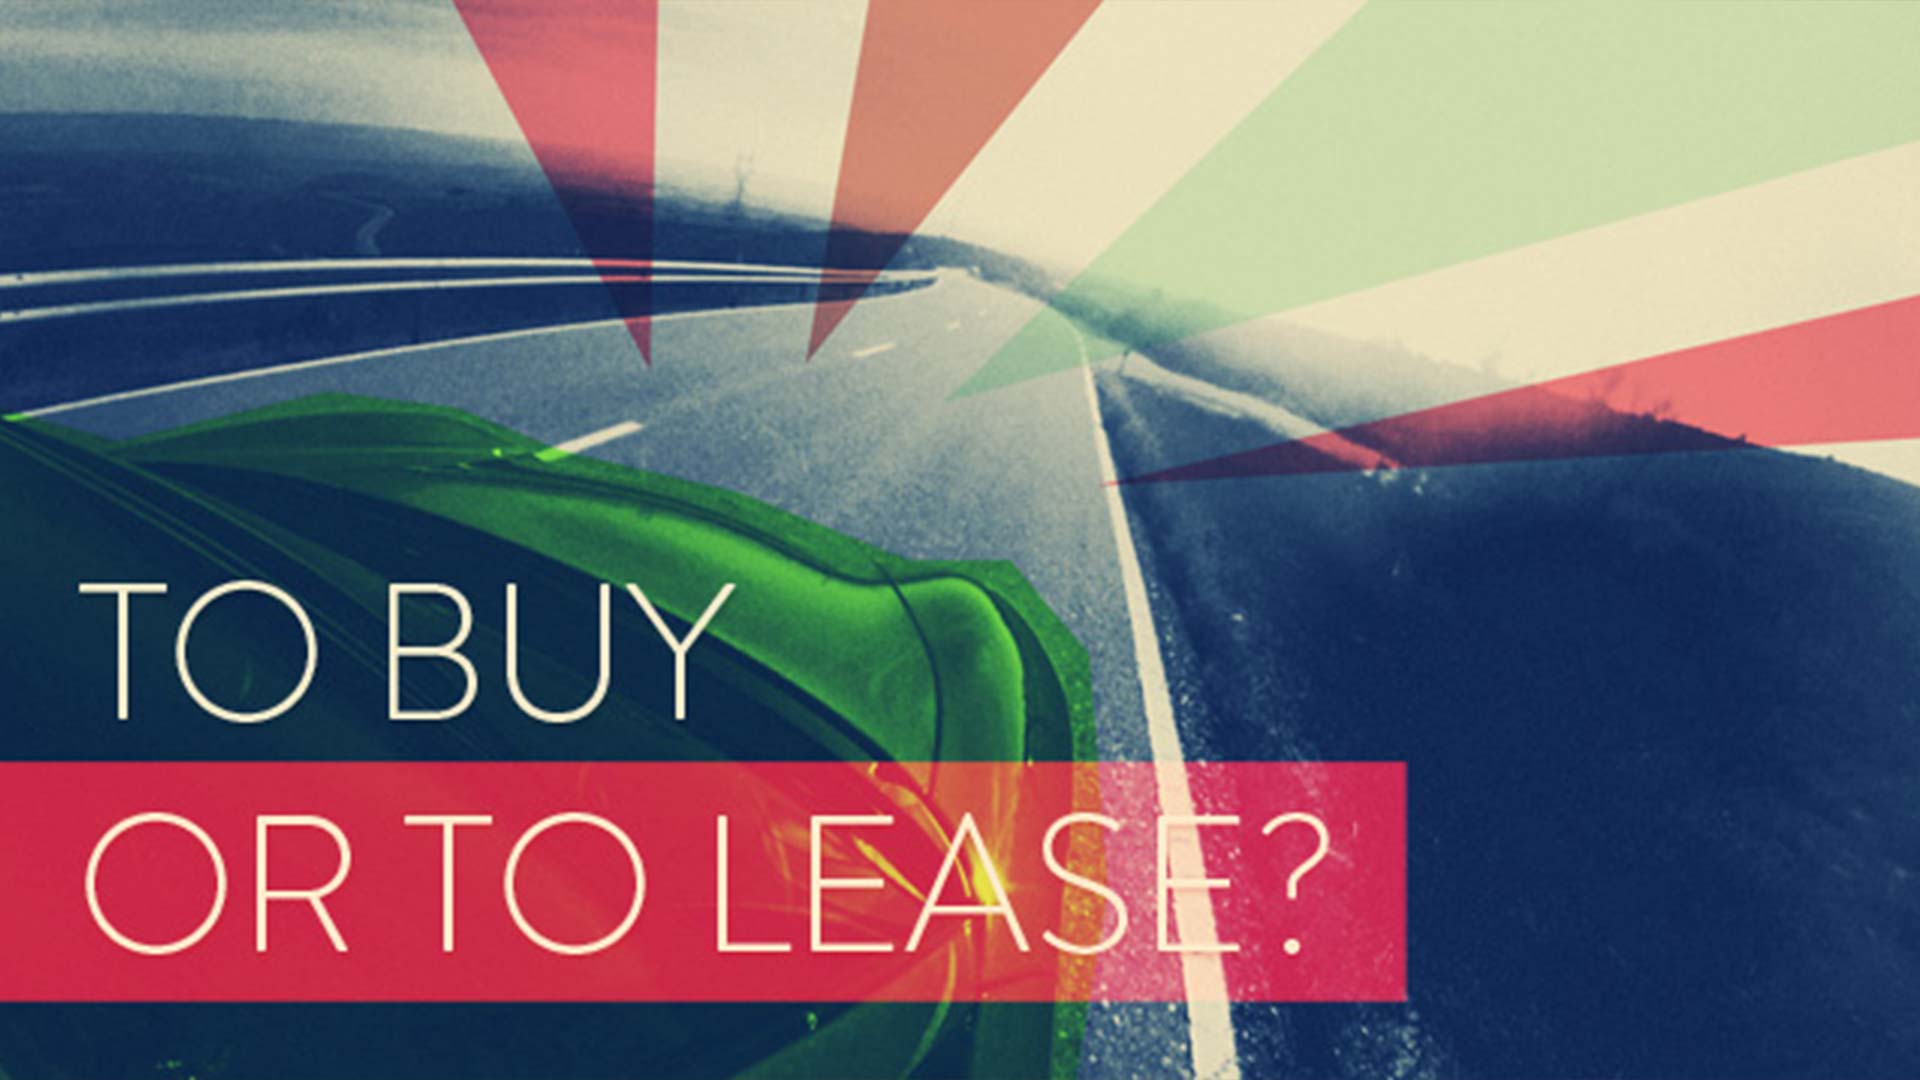 To Buy or to Lease - that is the Question